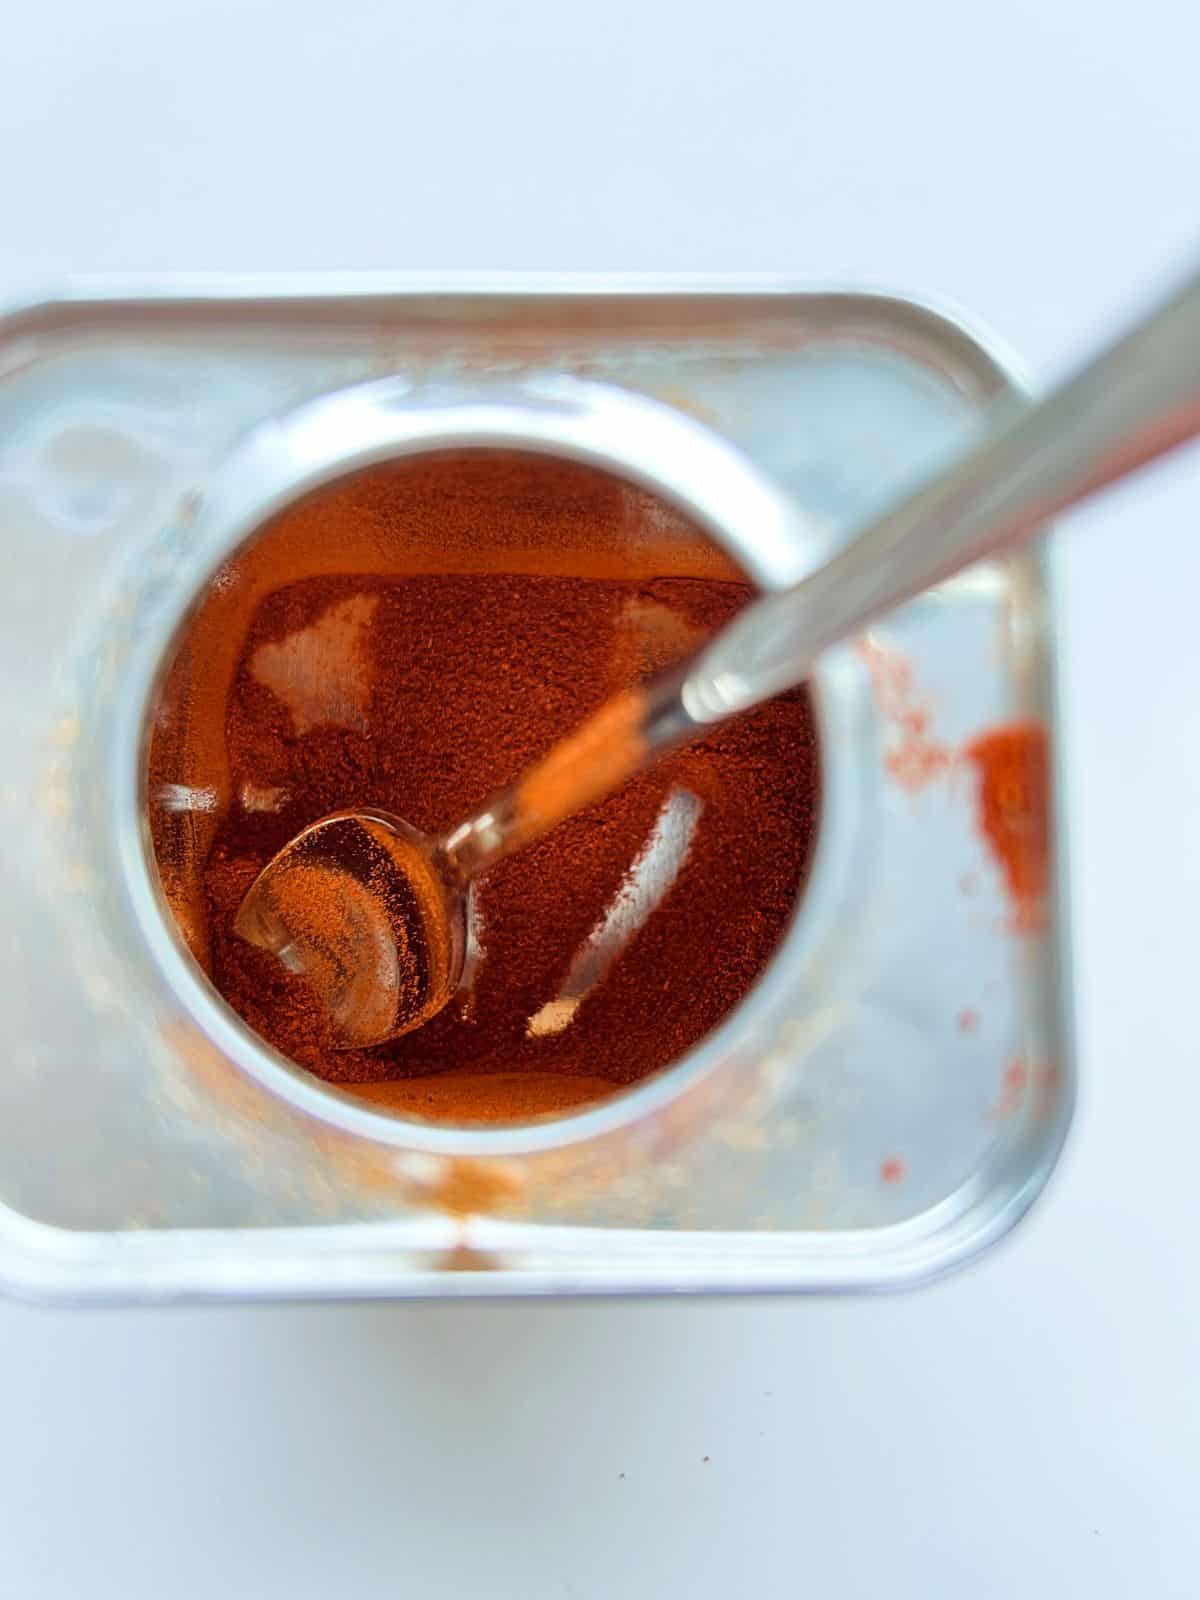 An image of spanish smoked paprika in a small tin with a spoon sticking out of the top opening of the tin.